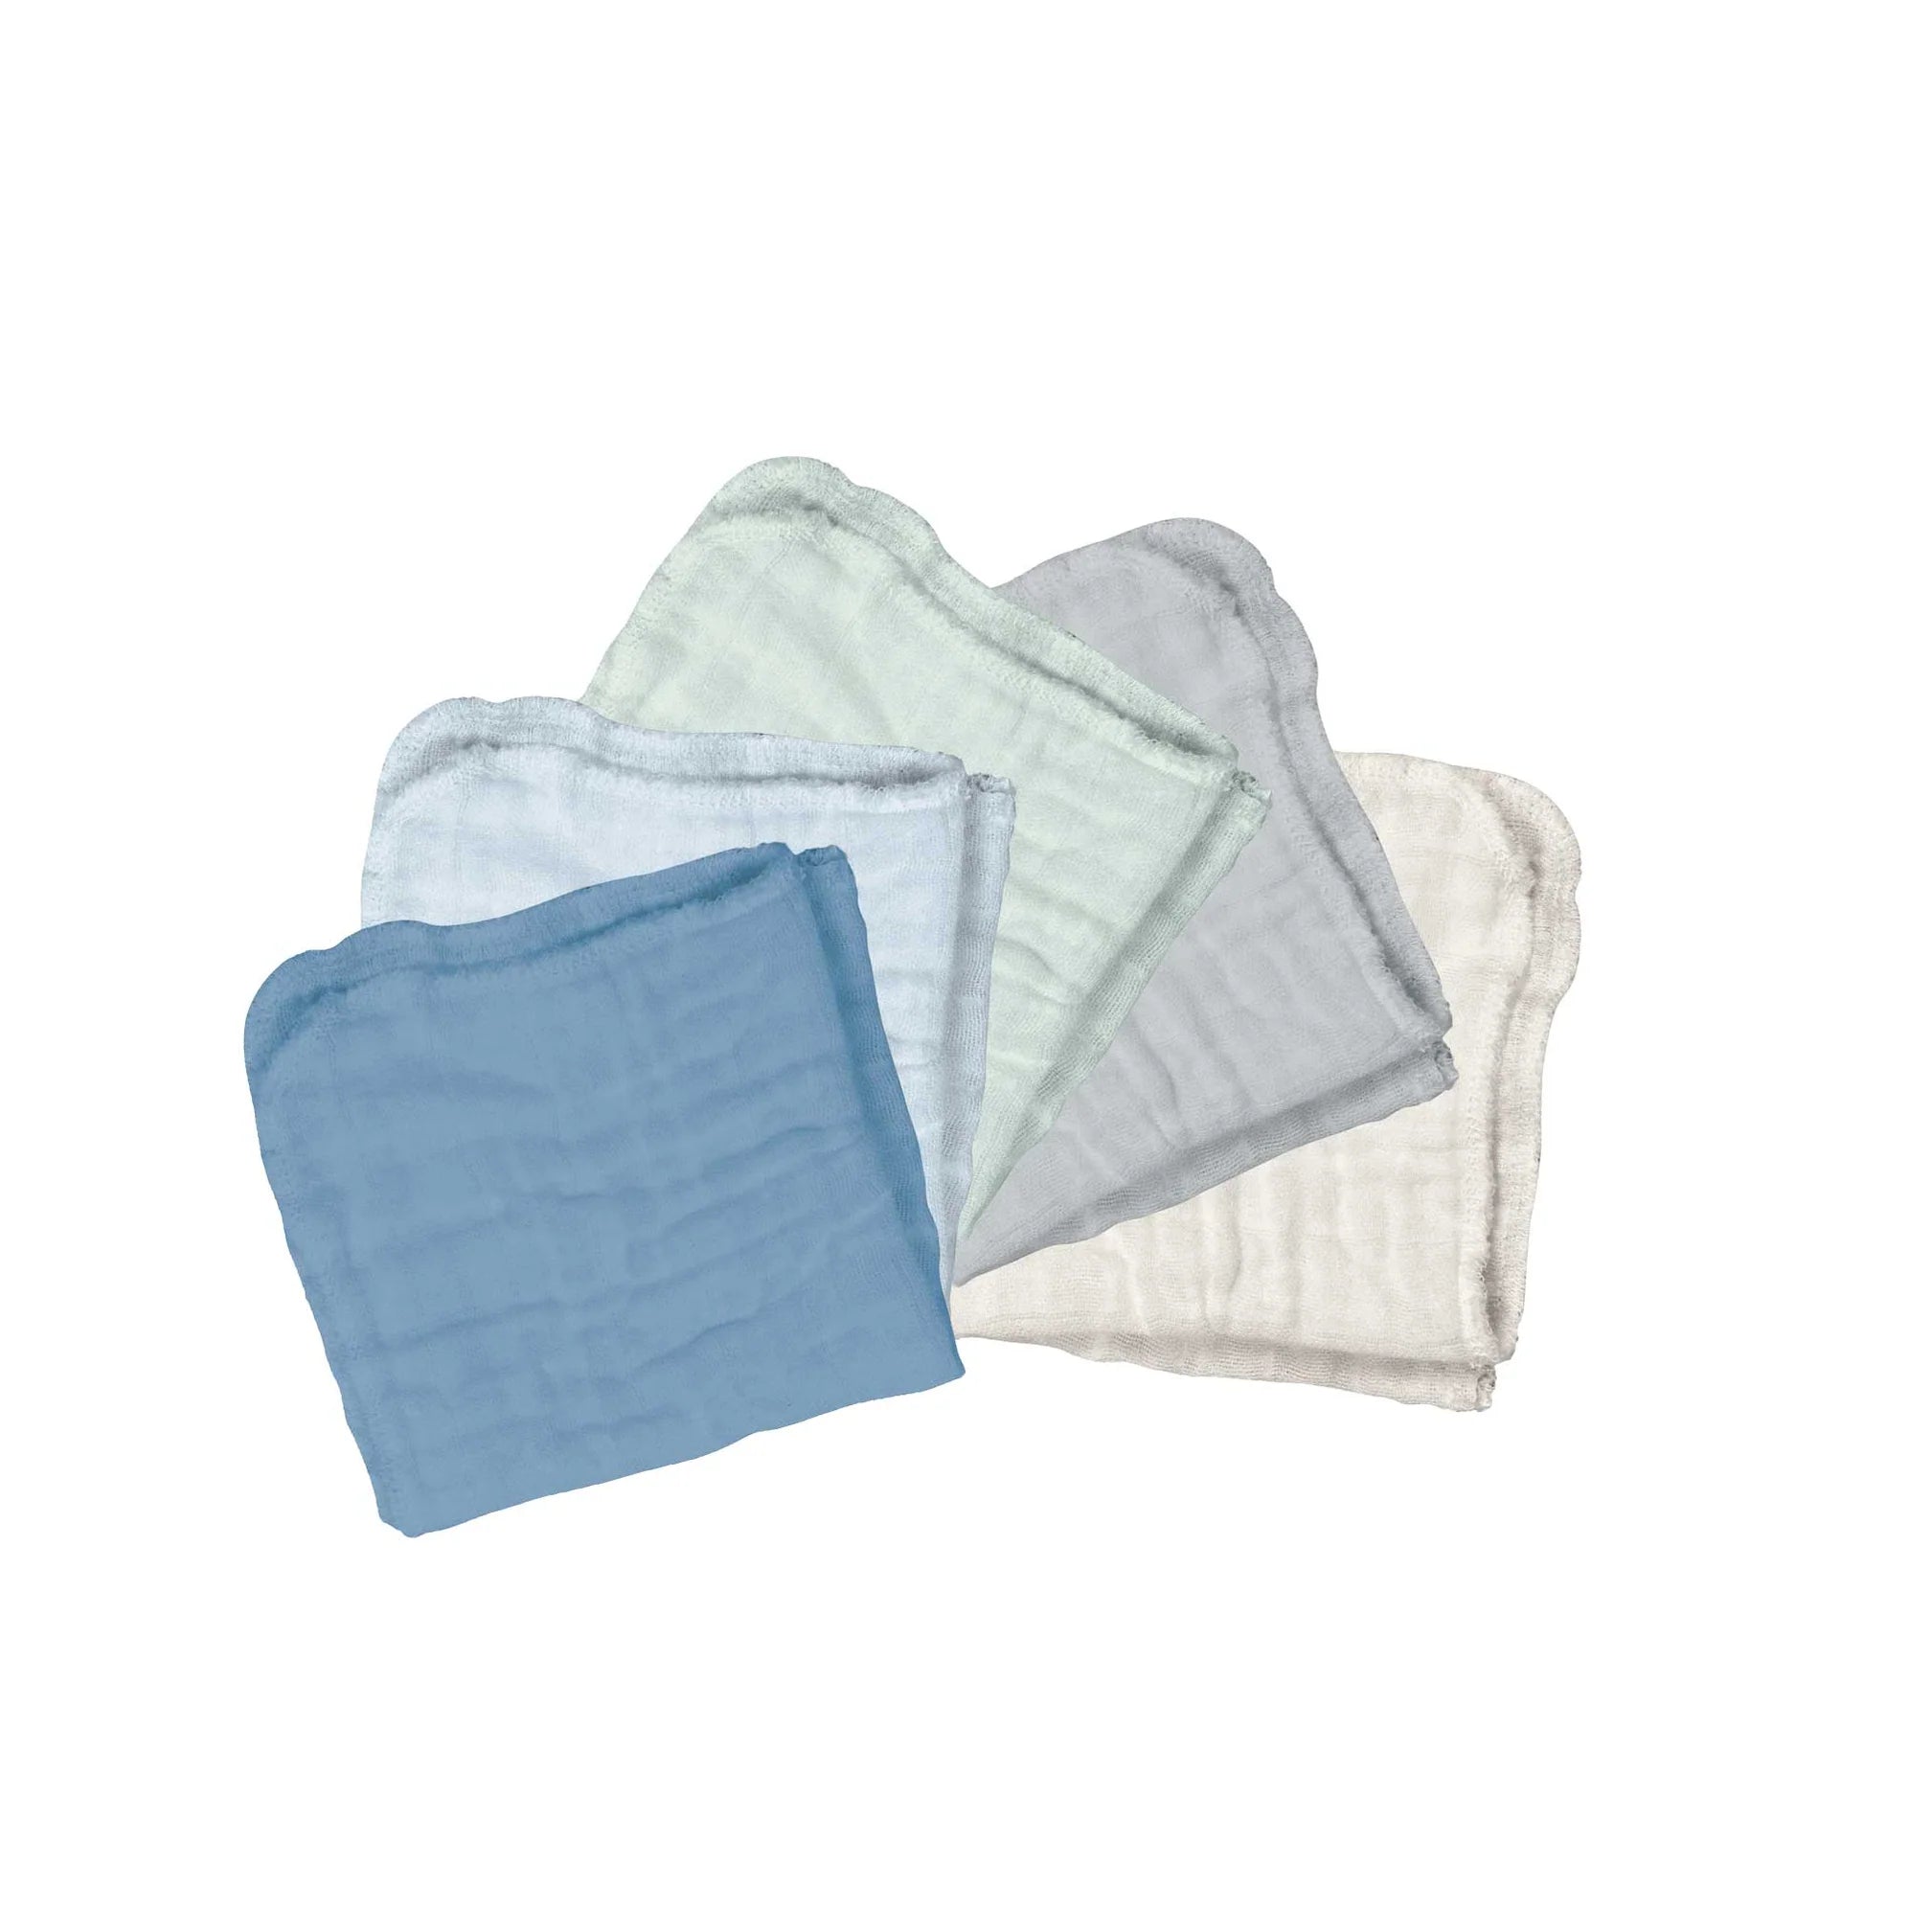 Green Sprouts Organic Cotton Muslin Cloths (5 Pack) - Blueberry Set-Green Sprouts-Little Giant Kidz